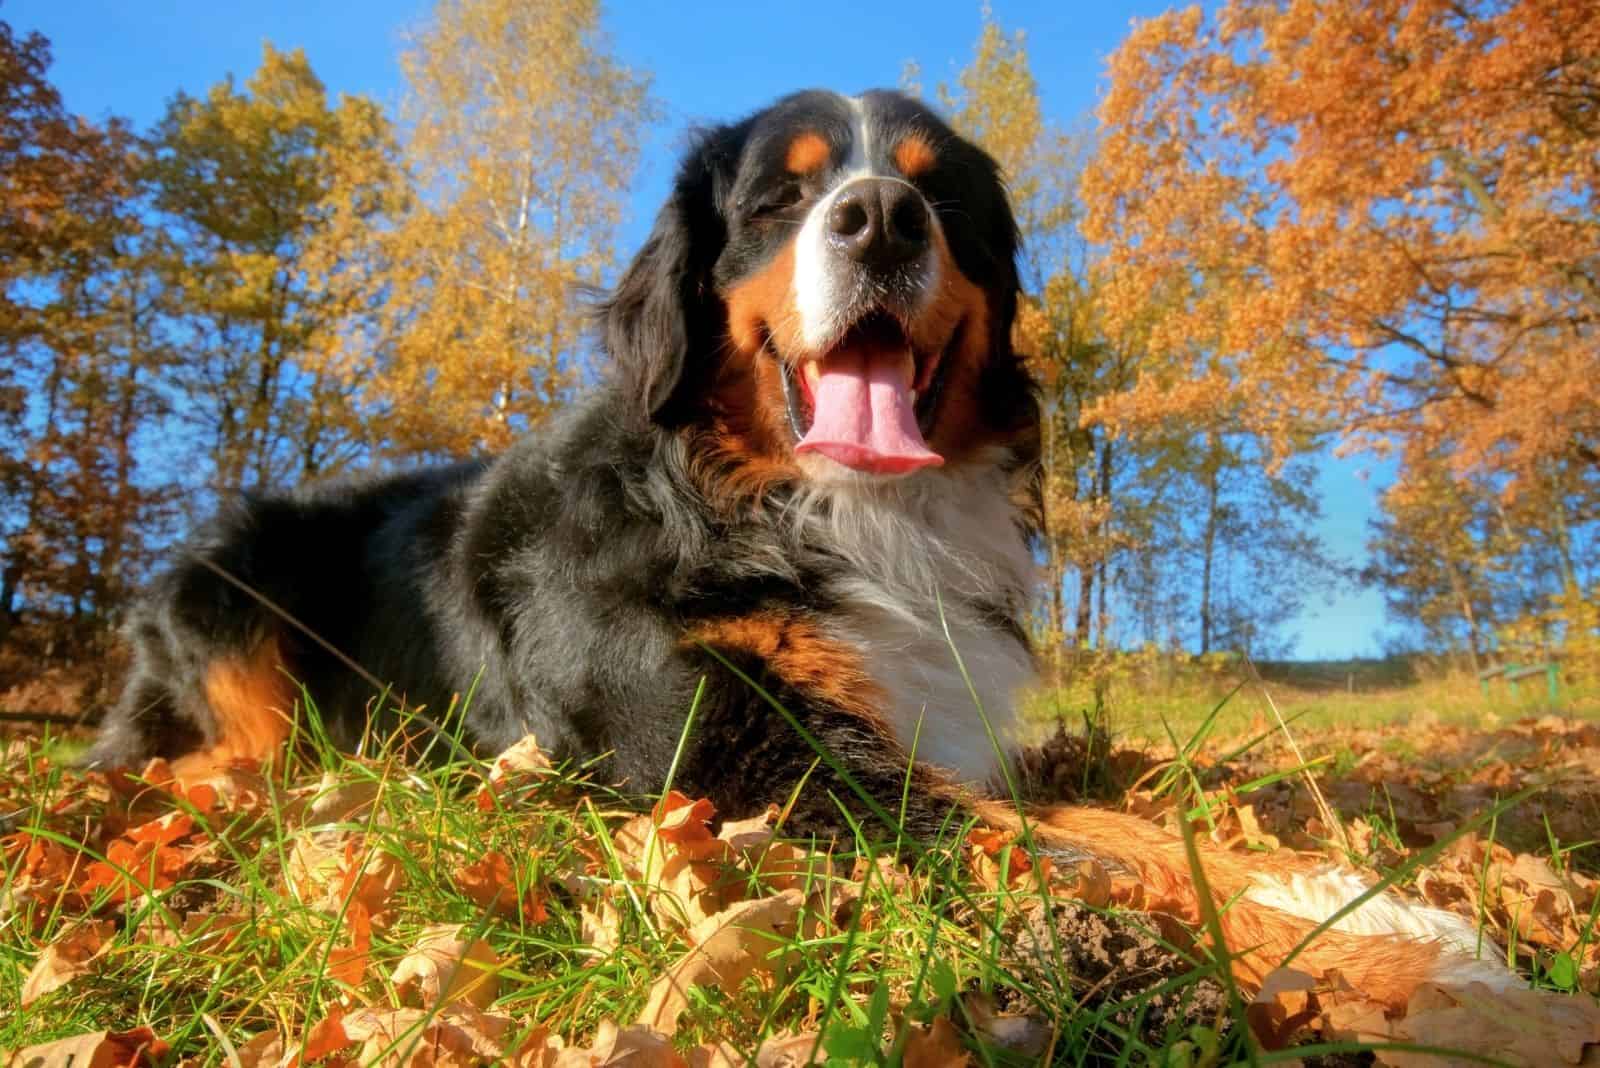 bernese mountain dog resting outdoors in low angle